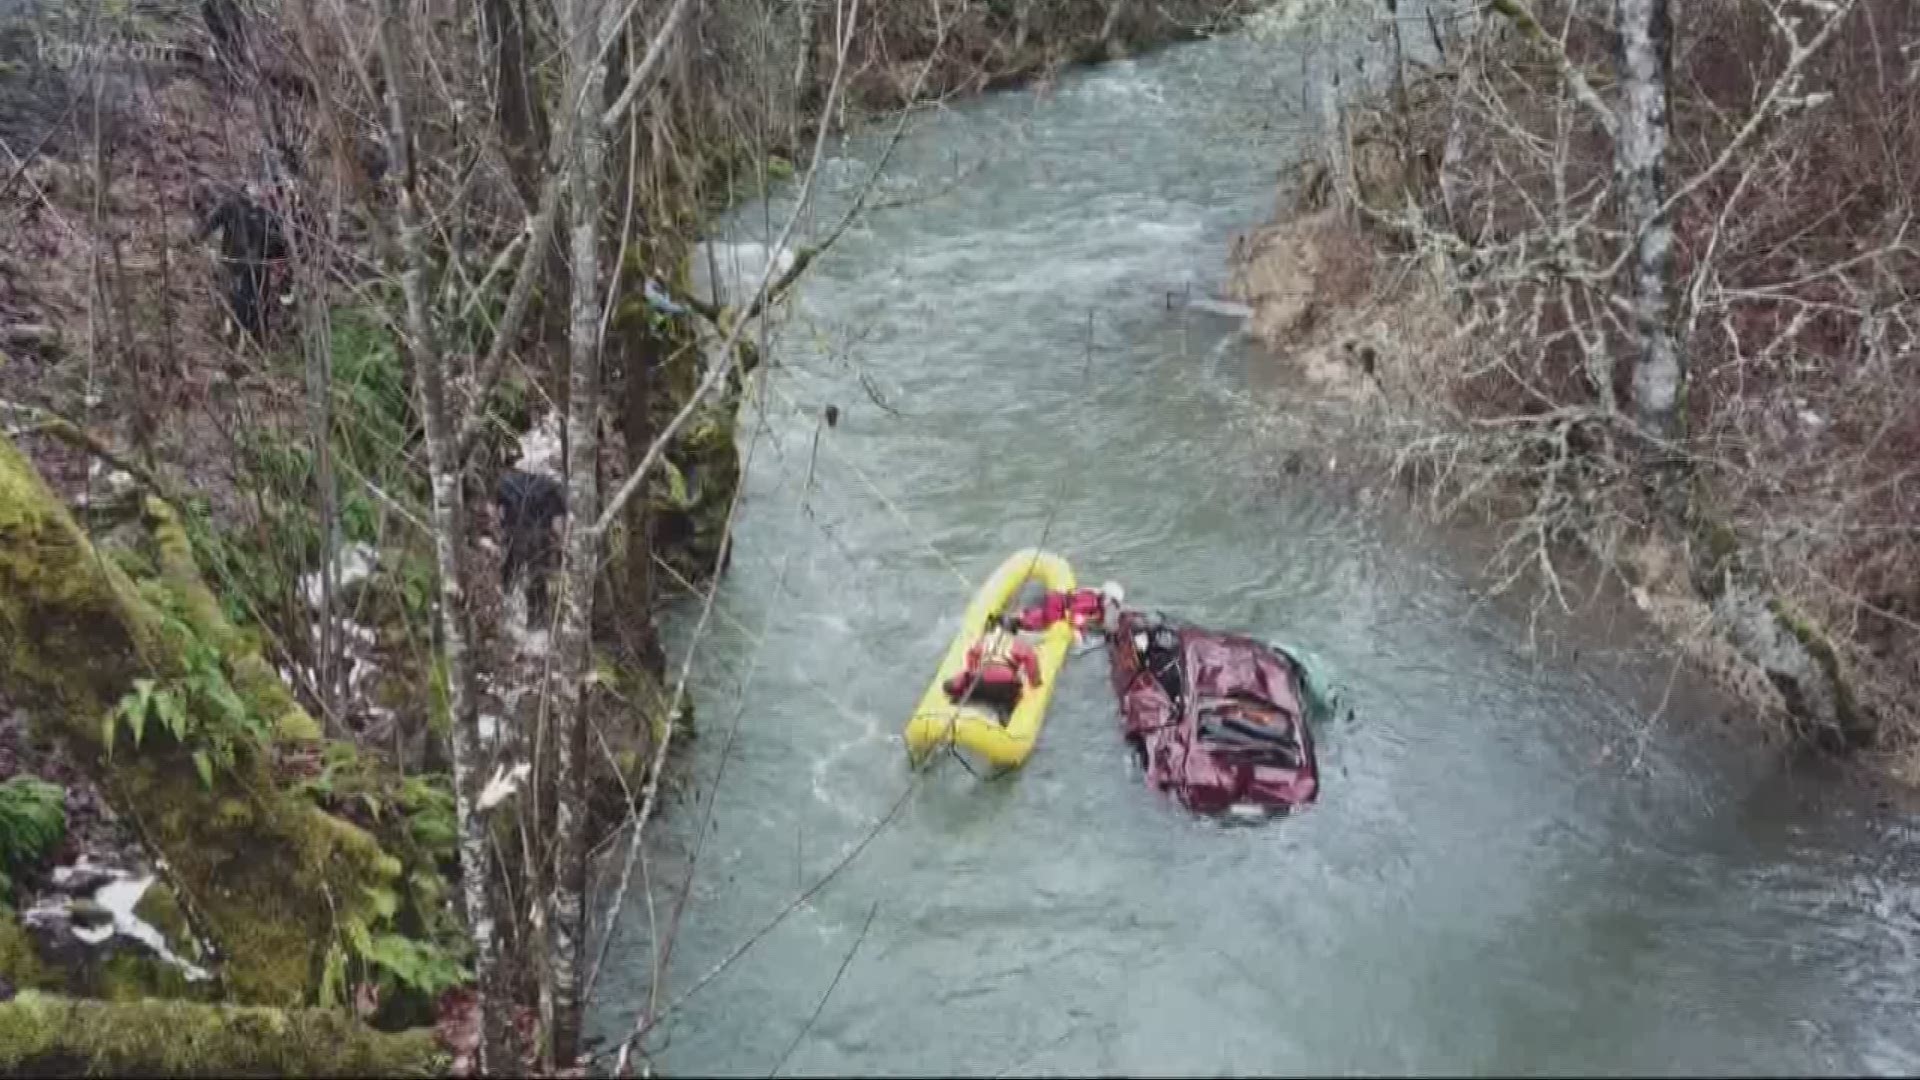 A high-speed chase ended with a water rescue in a Washington County creek.